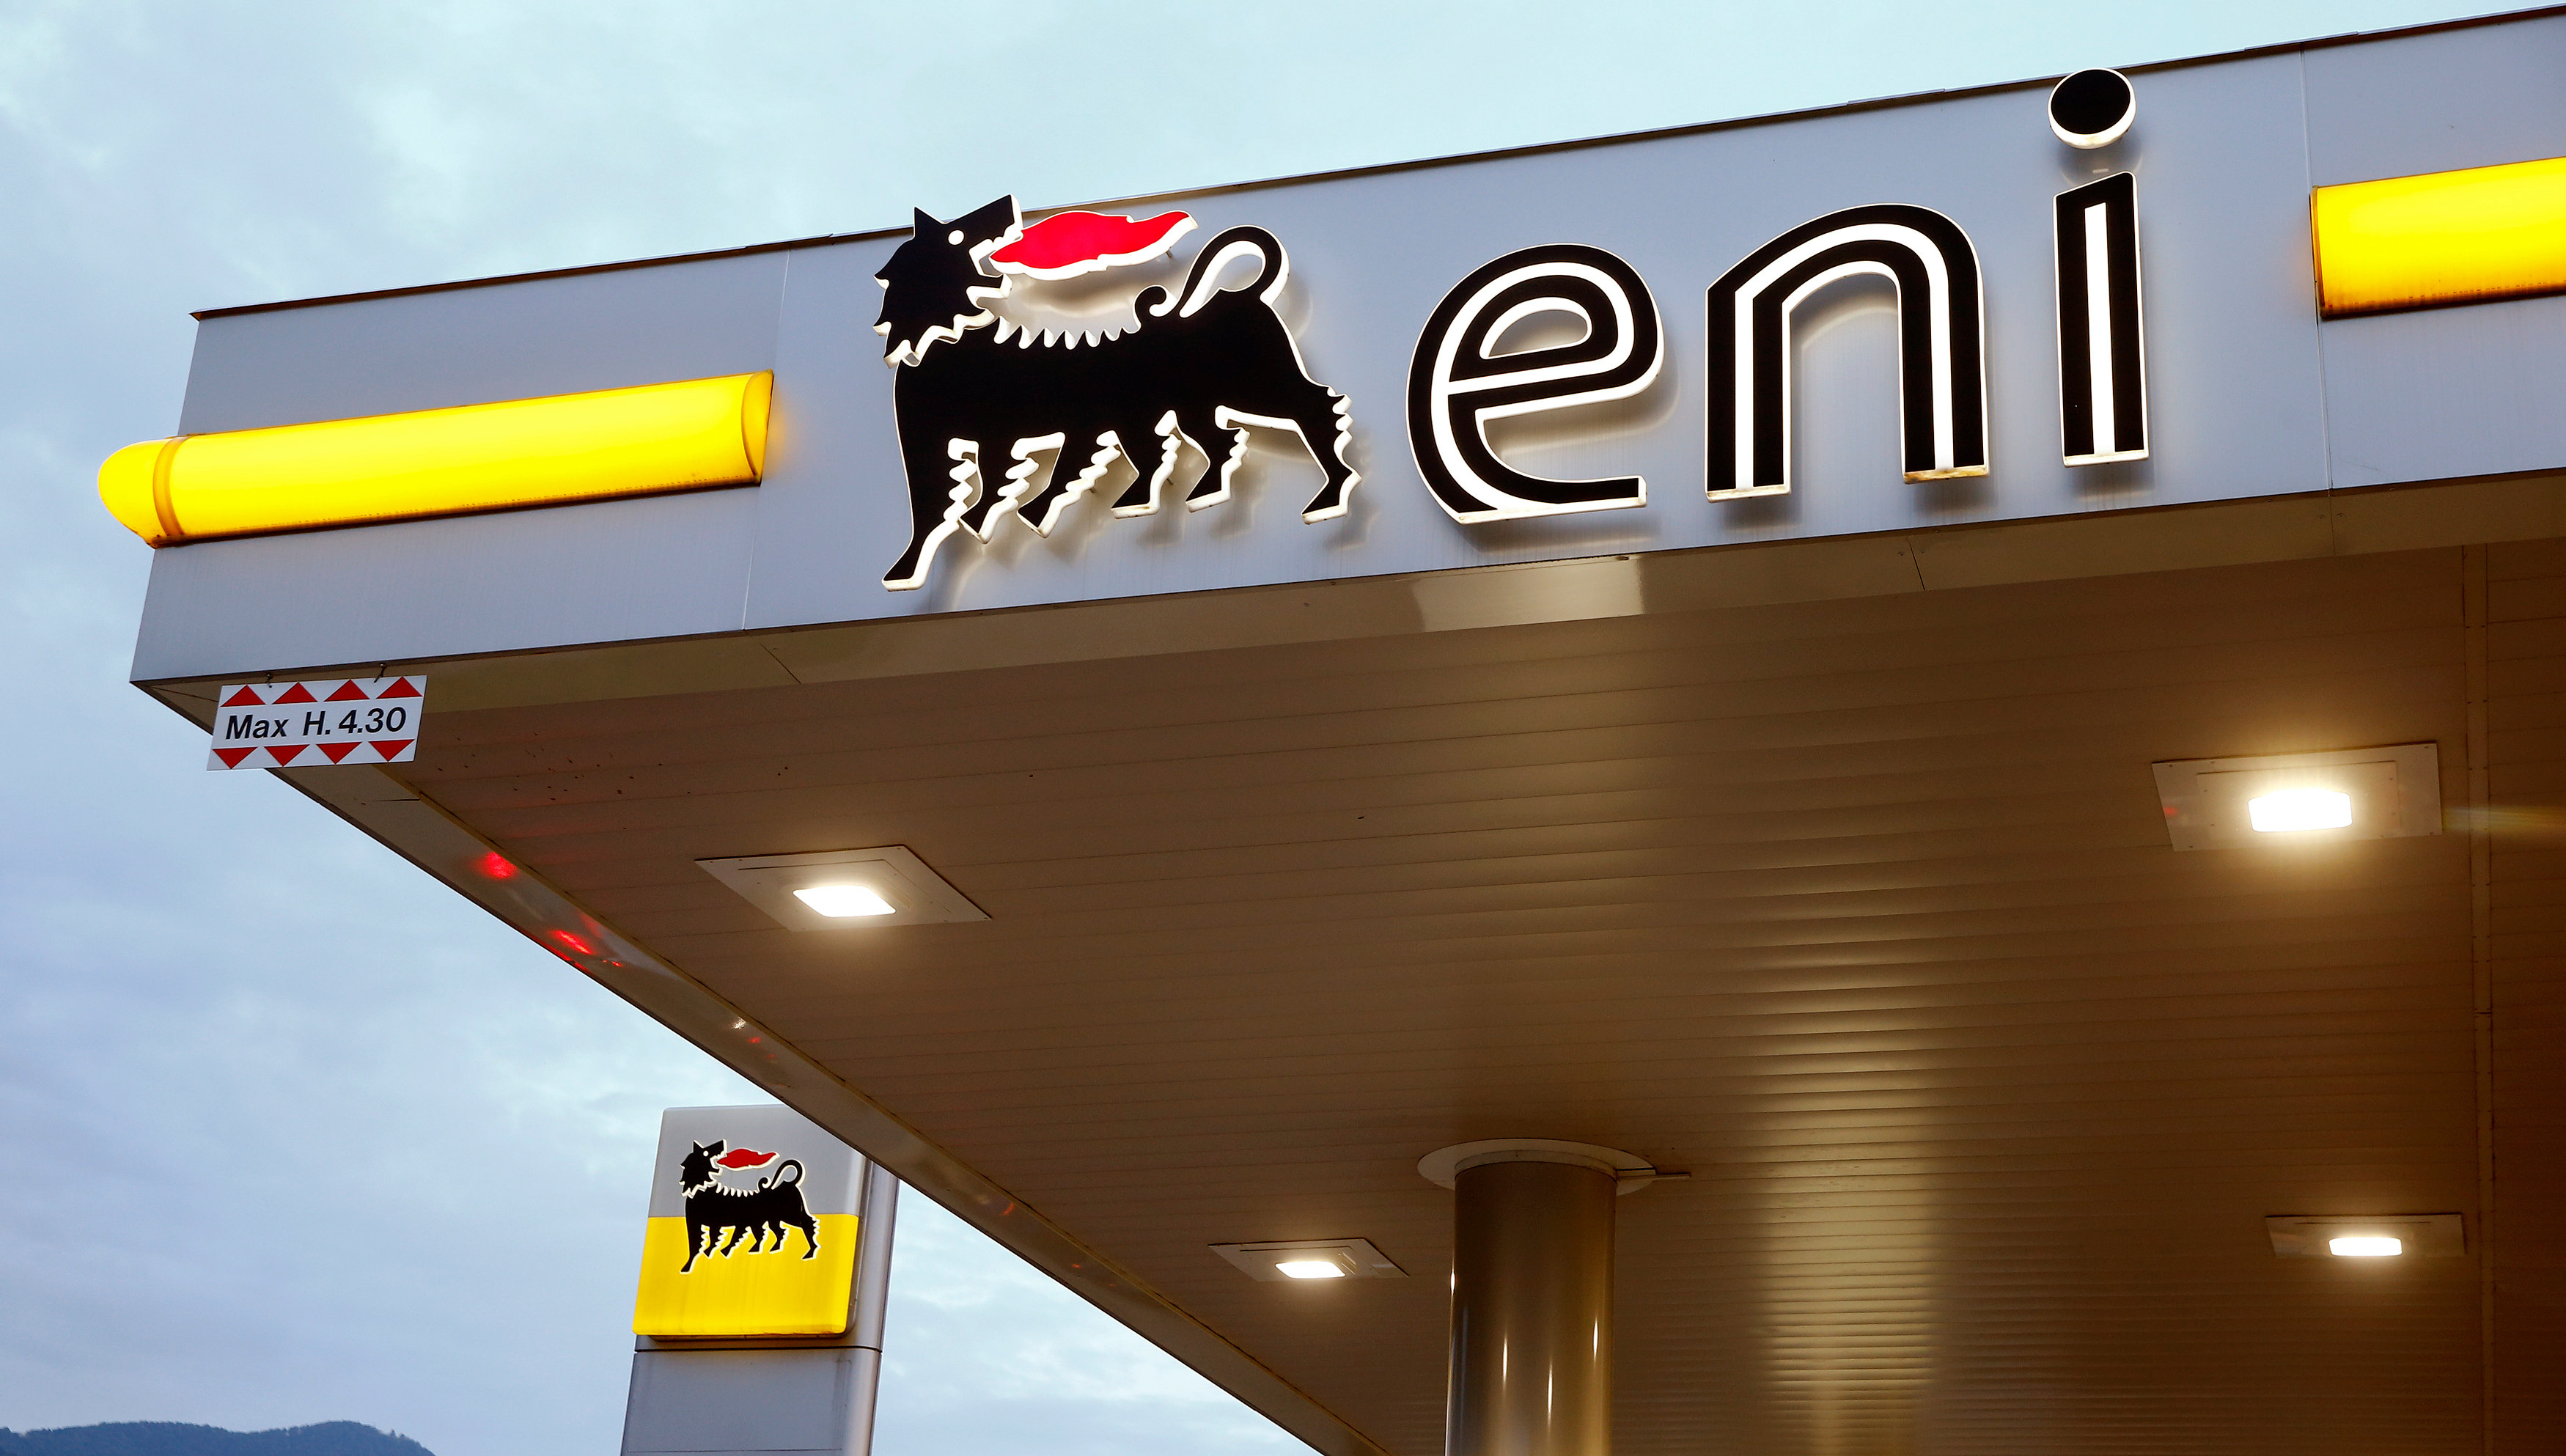 The logo of Italian Eni energy company is seen at a Agip gas station in Lugano